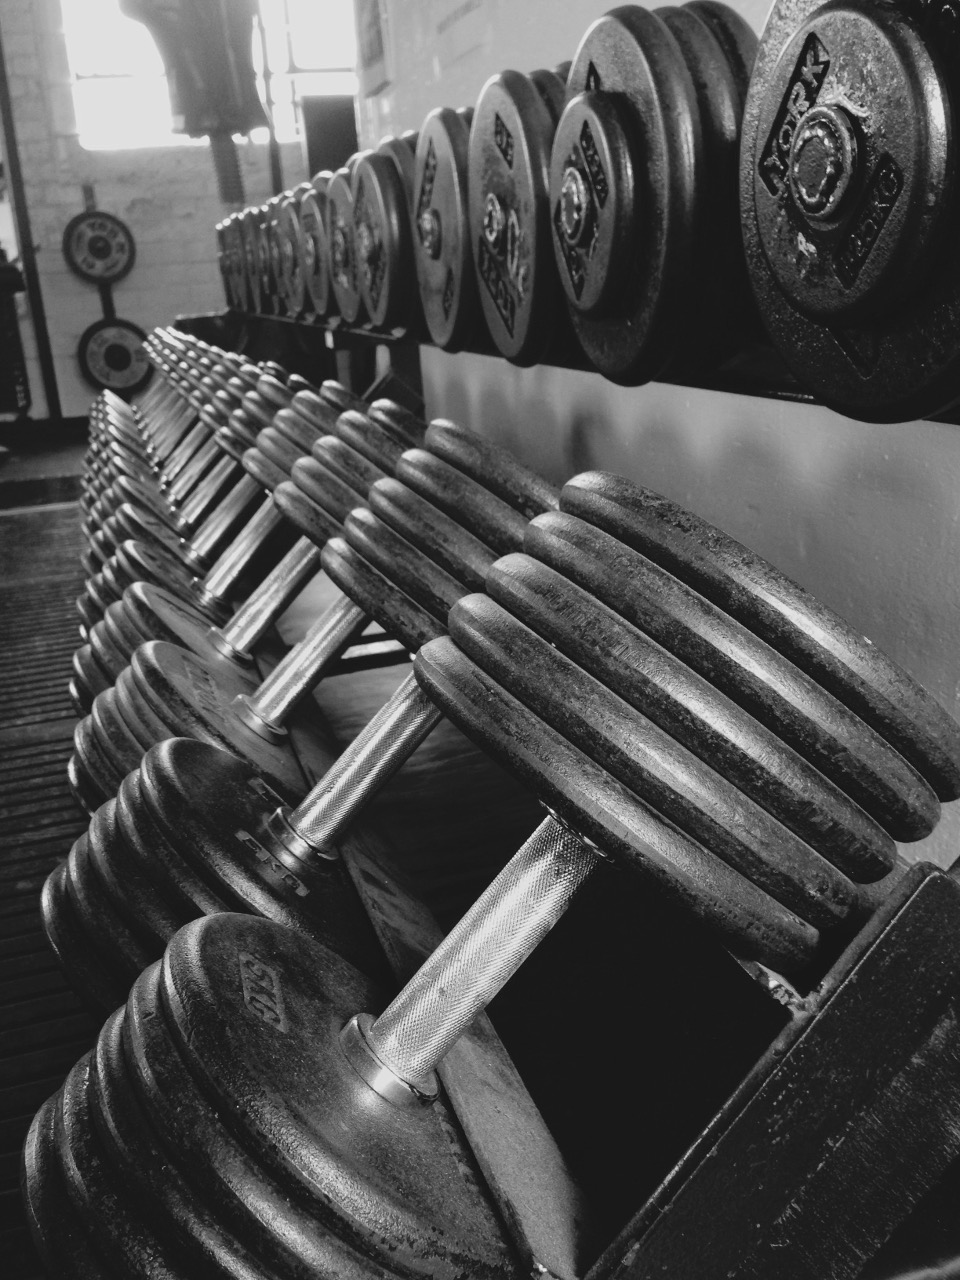 WEIGHTS IMAGE